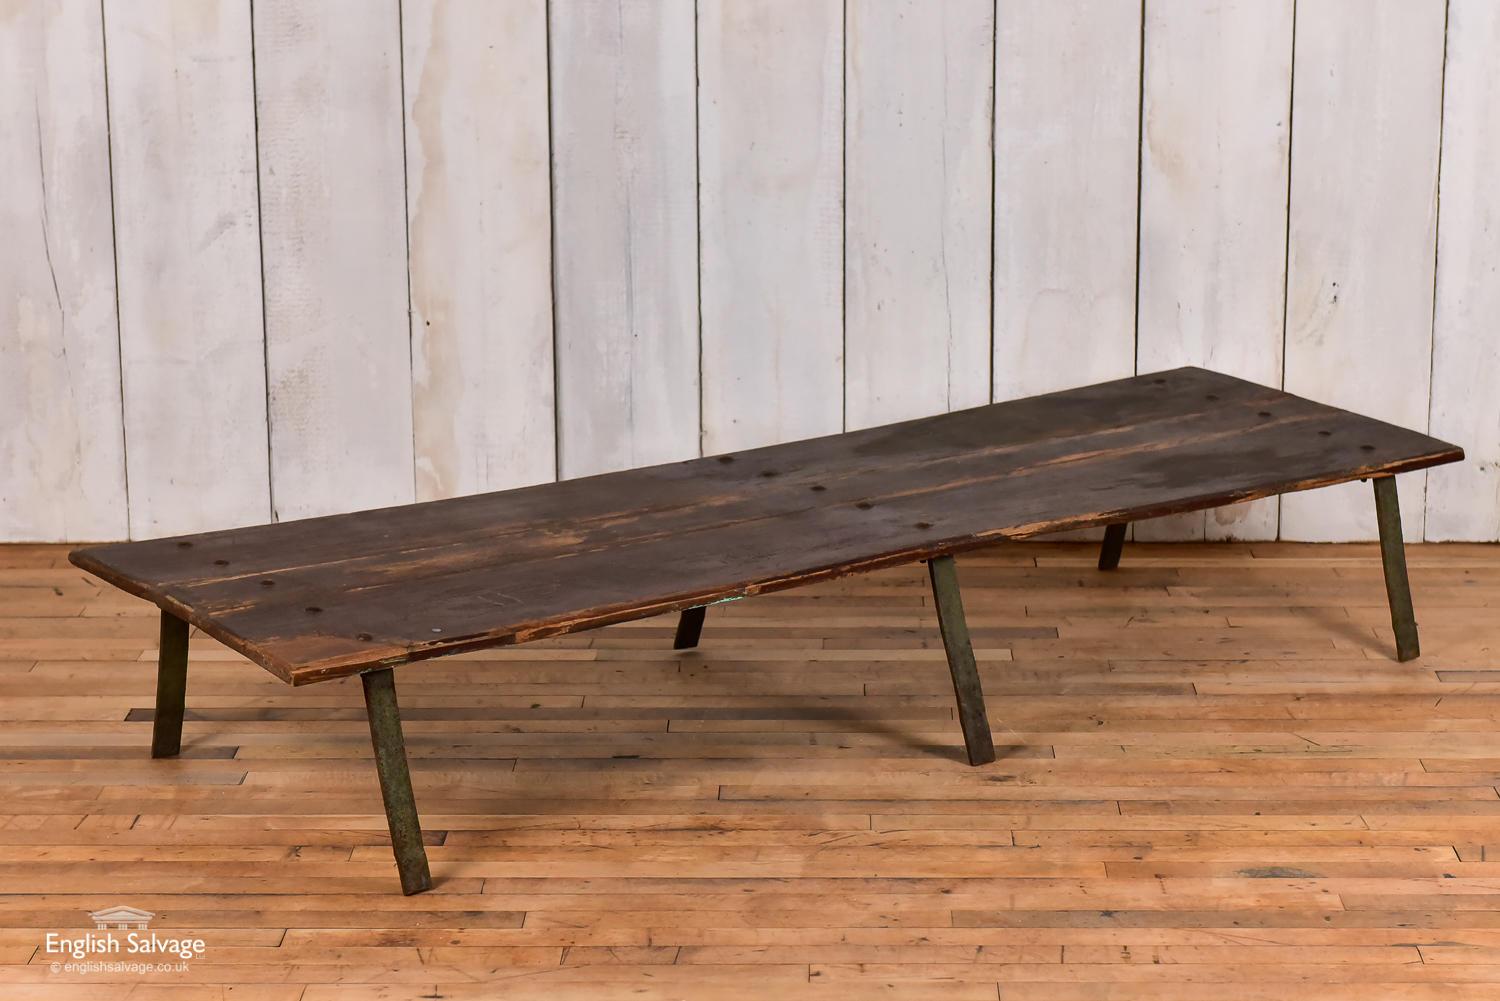 Simple hardwood coffee table with iron legs. Bolted top and angled leg design. Scuffs and scrapes to the top.